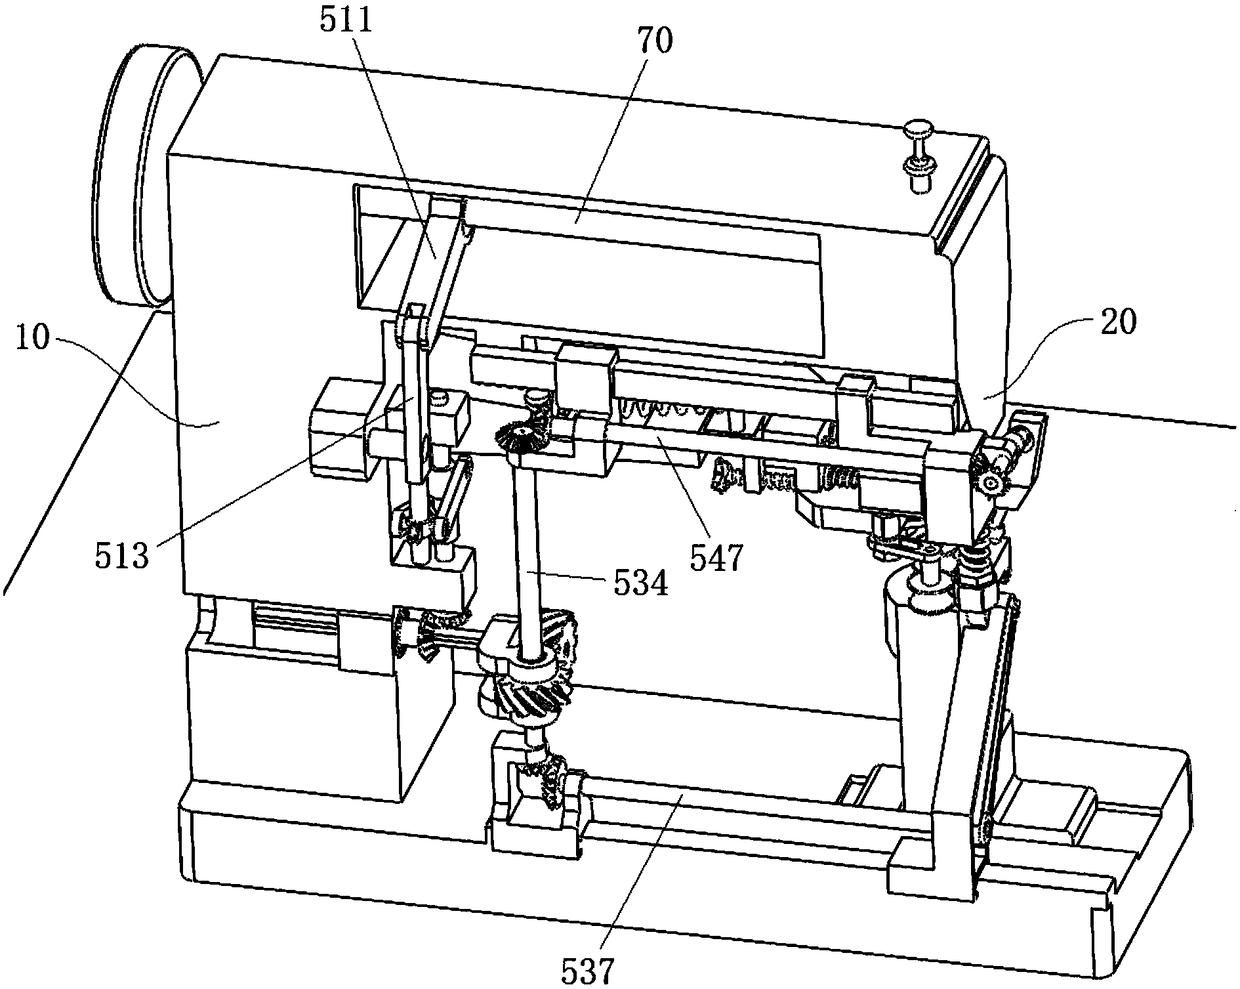 Sewing machine capable of automatic processing sole threads